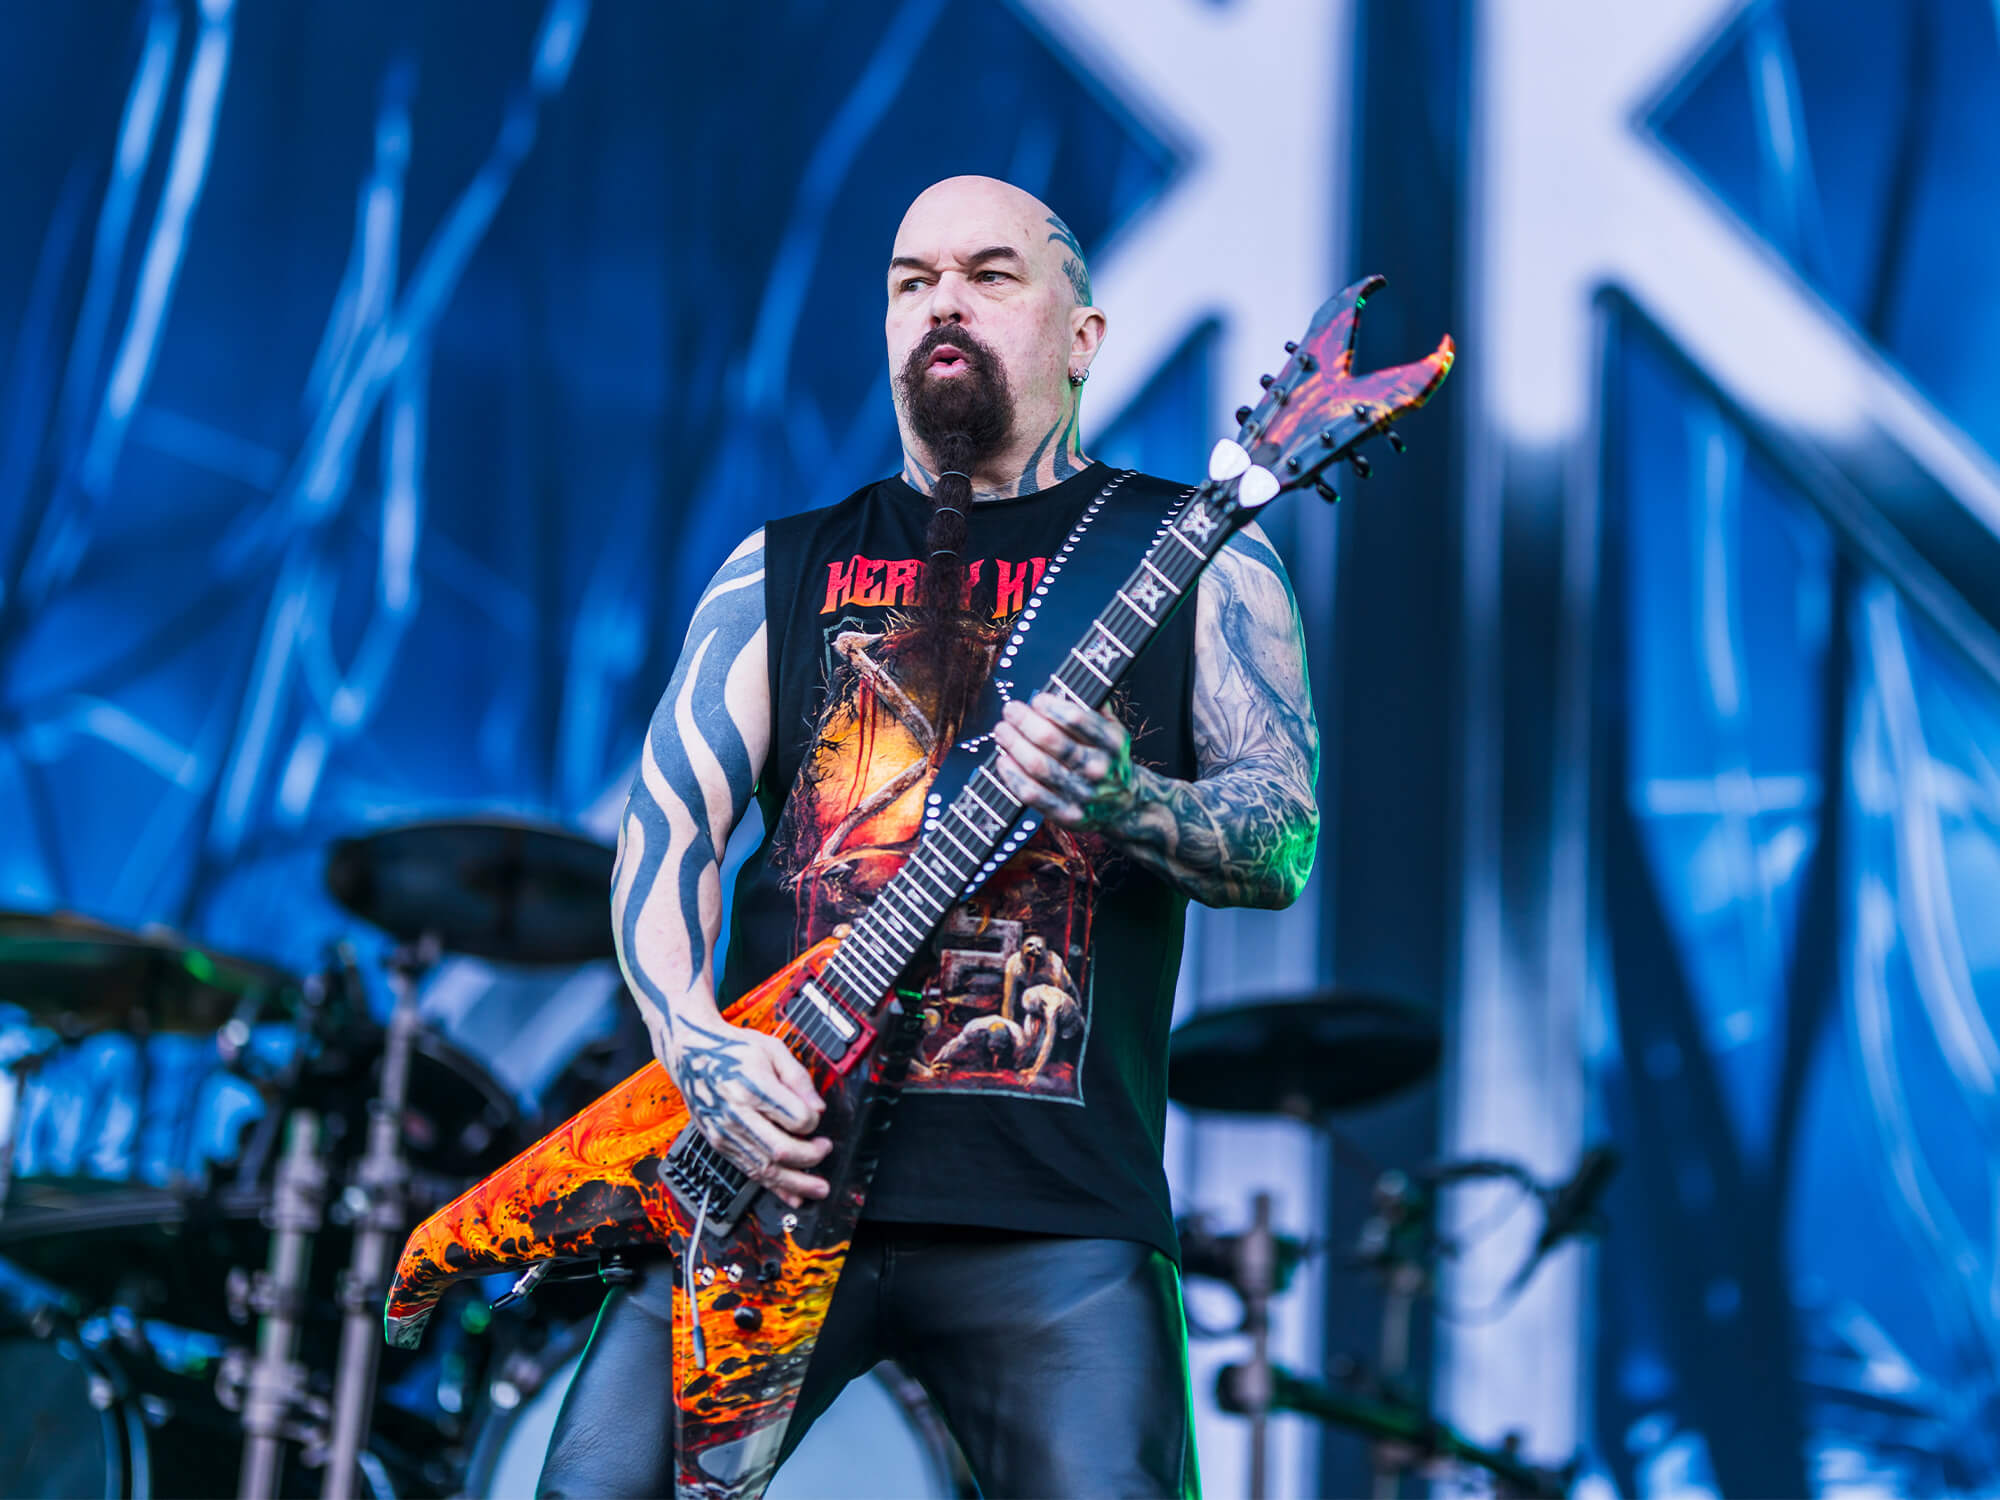 Kerry King photographed playing guitar on stage.